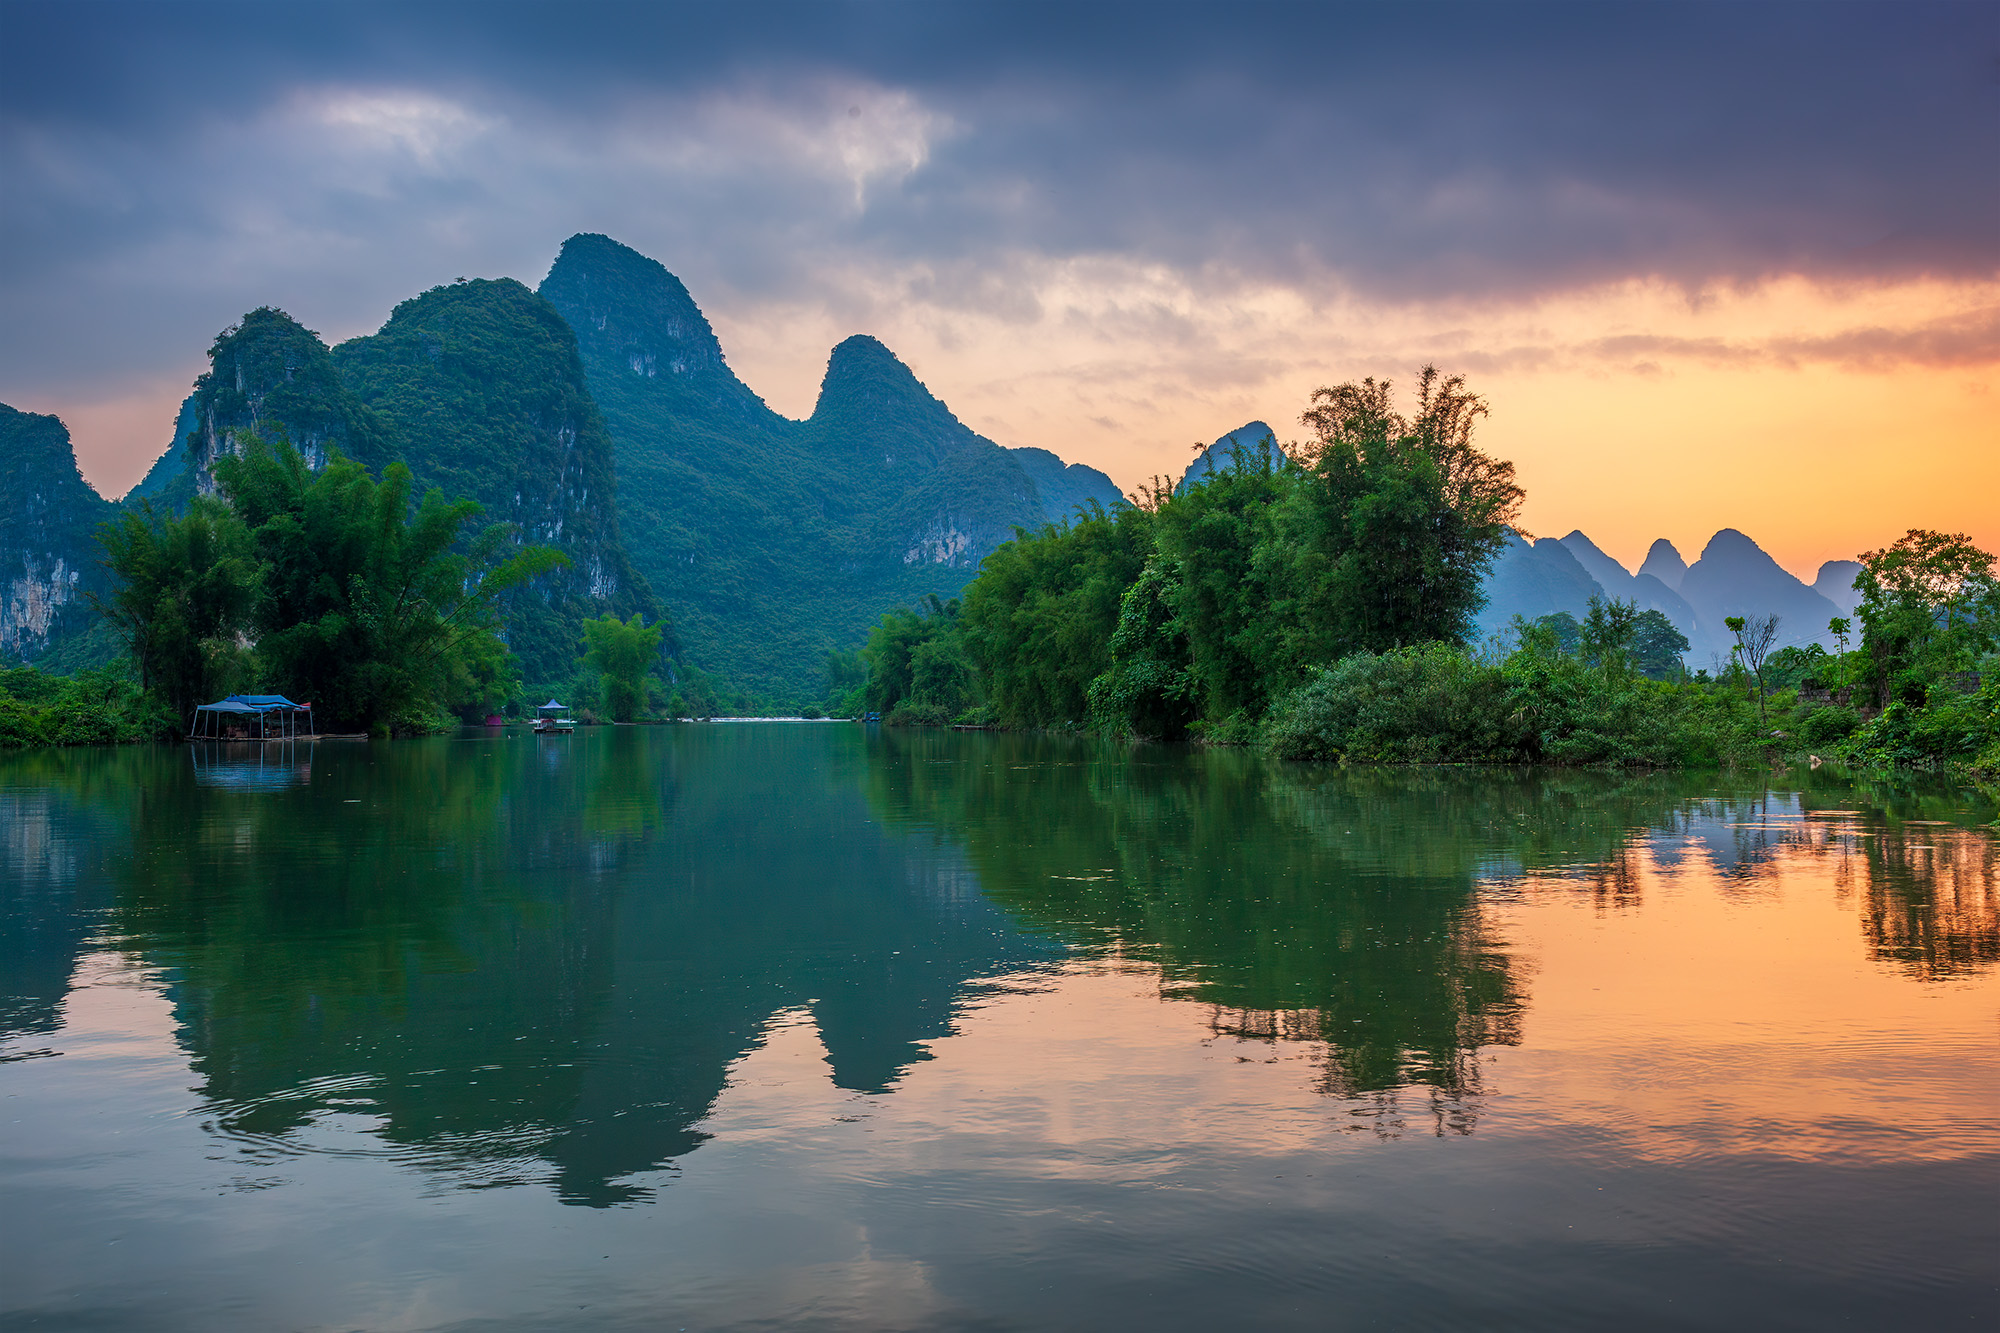 In this striking image from the Yulong River near Yangshuo, China, nature's grandeur unfolds as the karst mountains are mirrored...